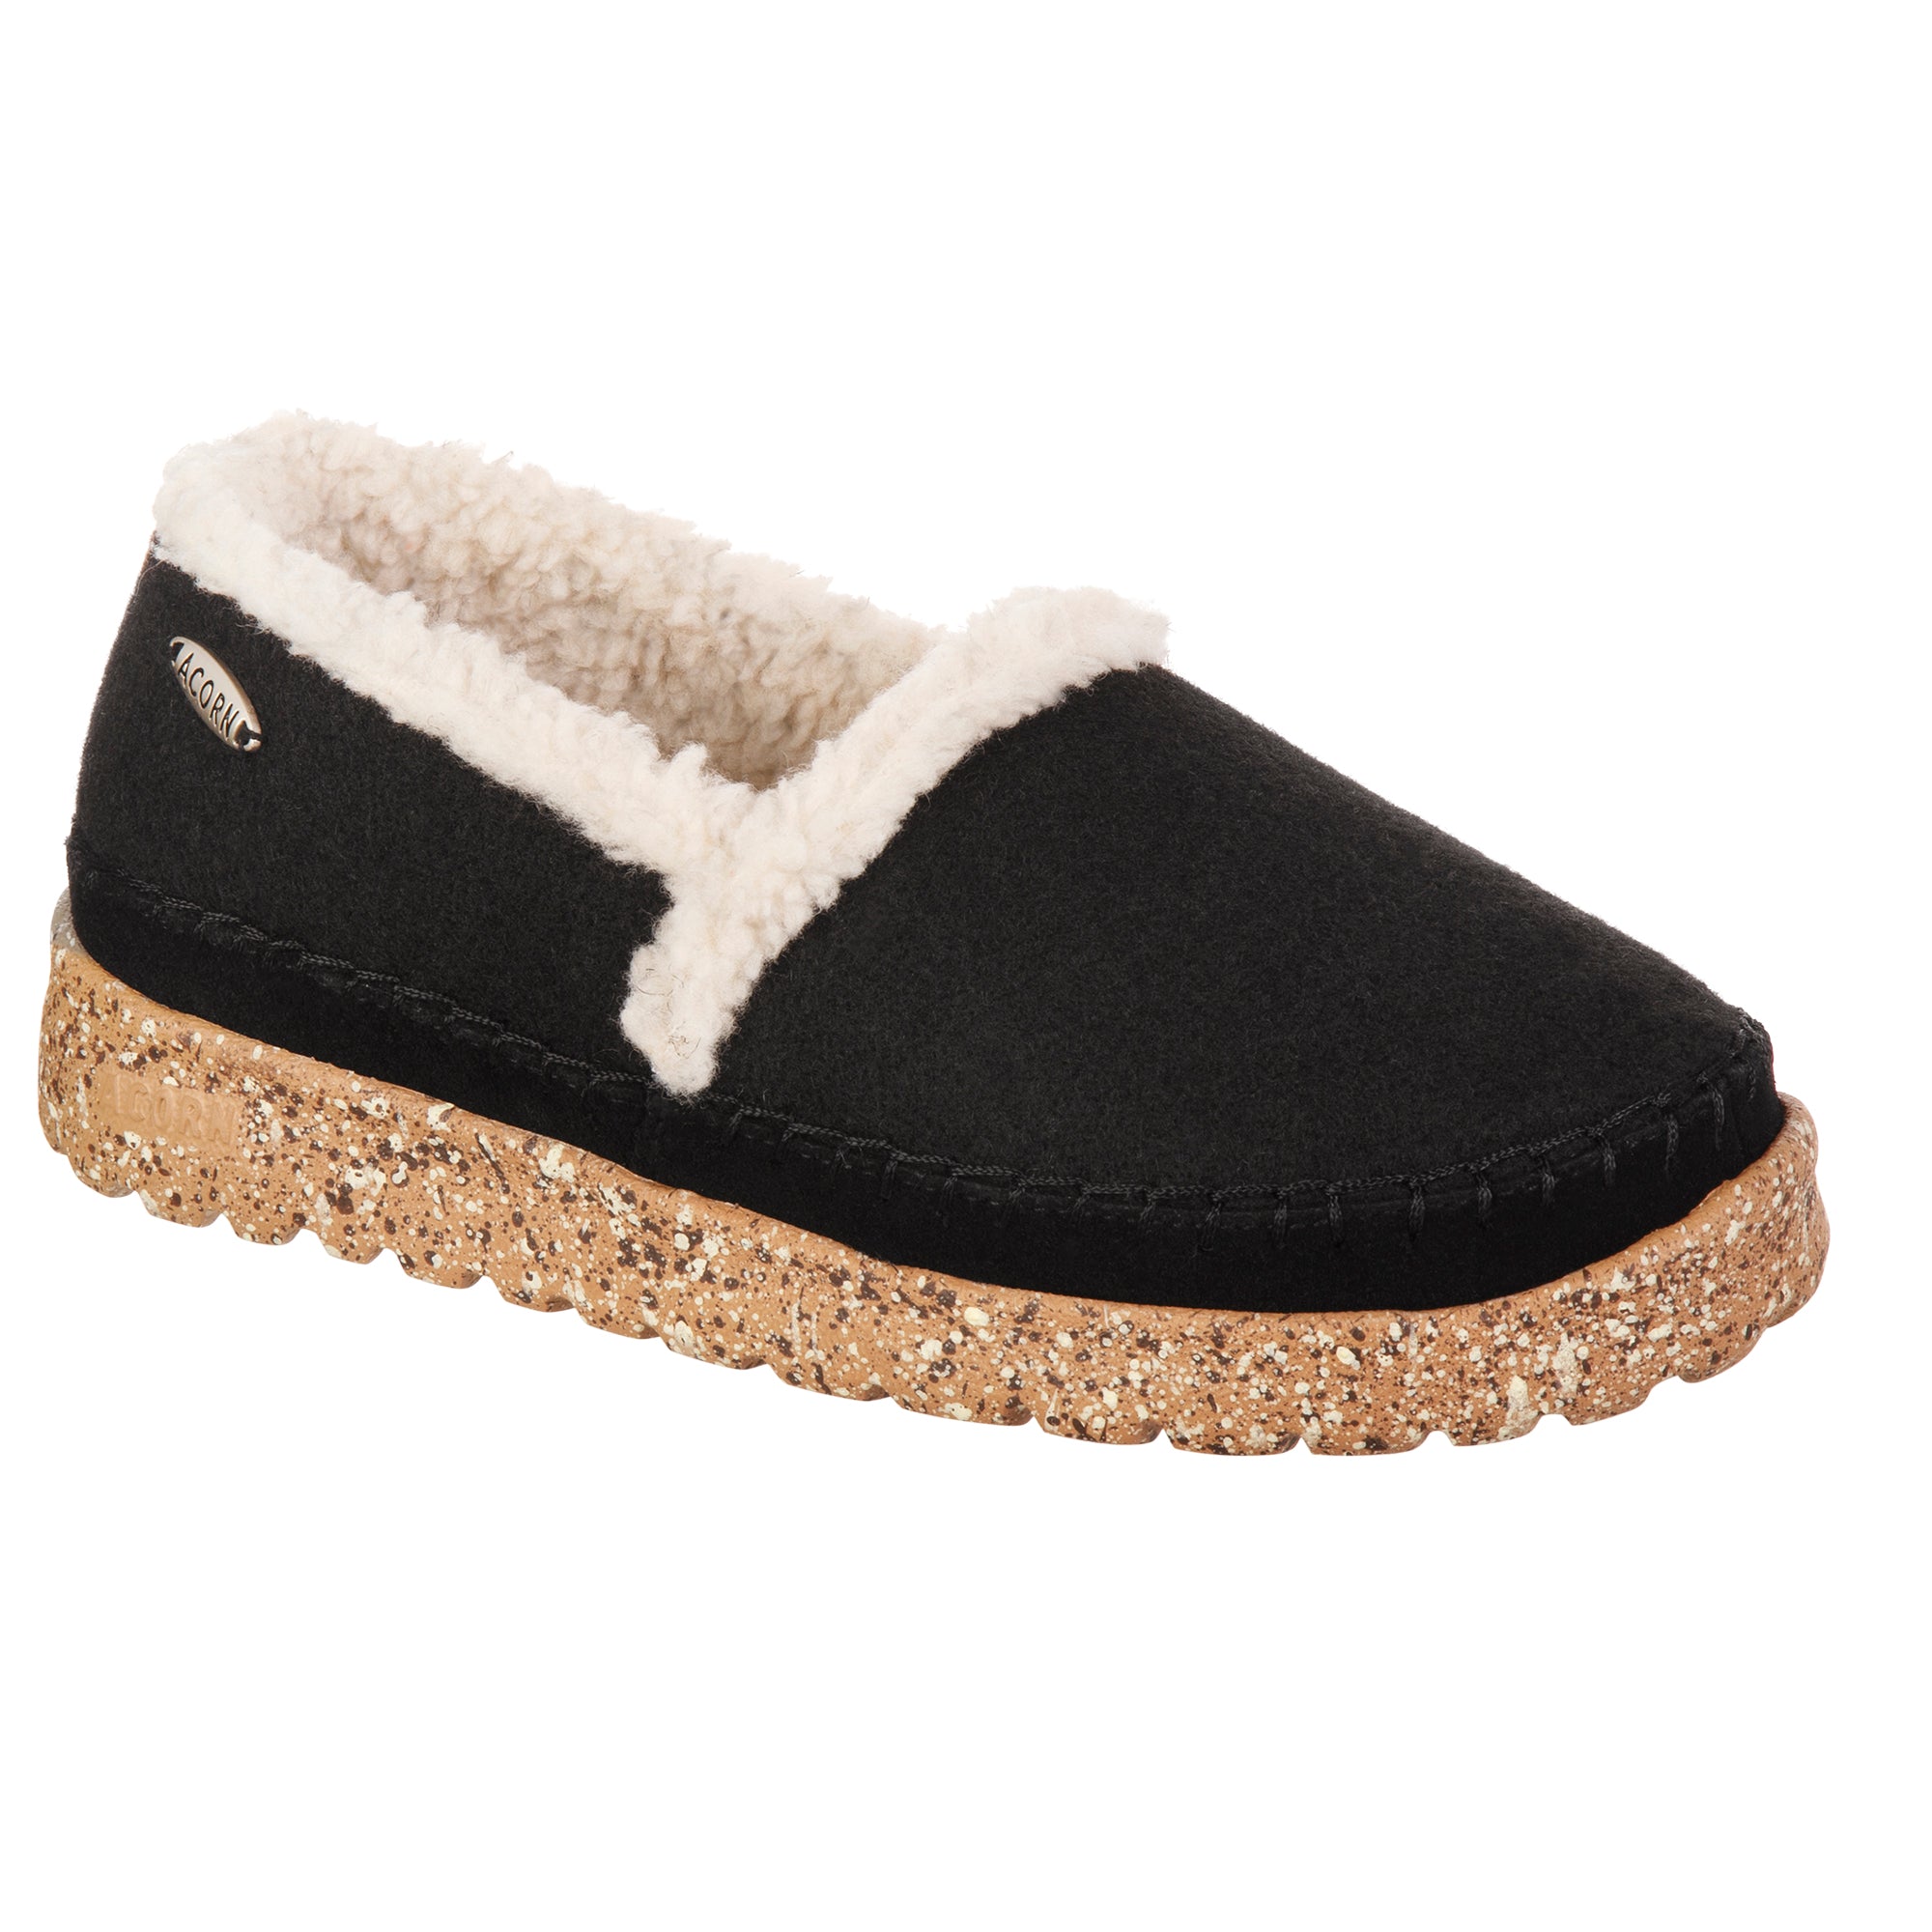 Women's Recycled Rockland Moc Slipper with Everywear® Comfort